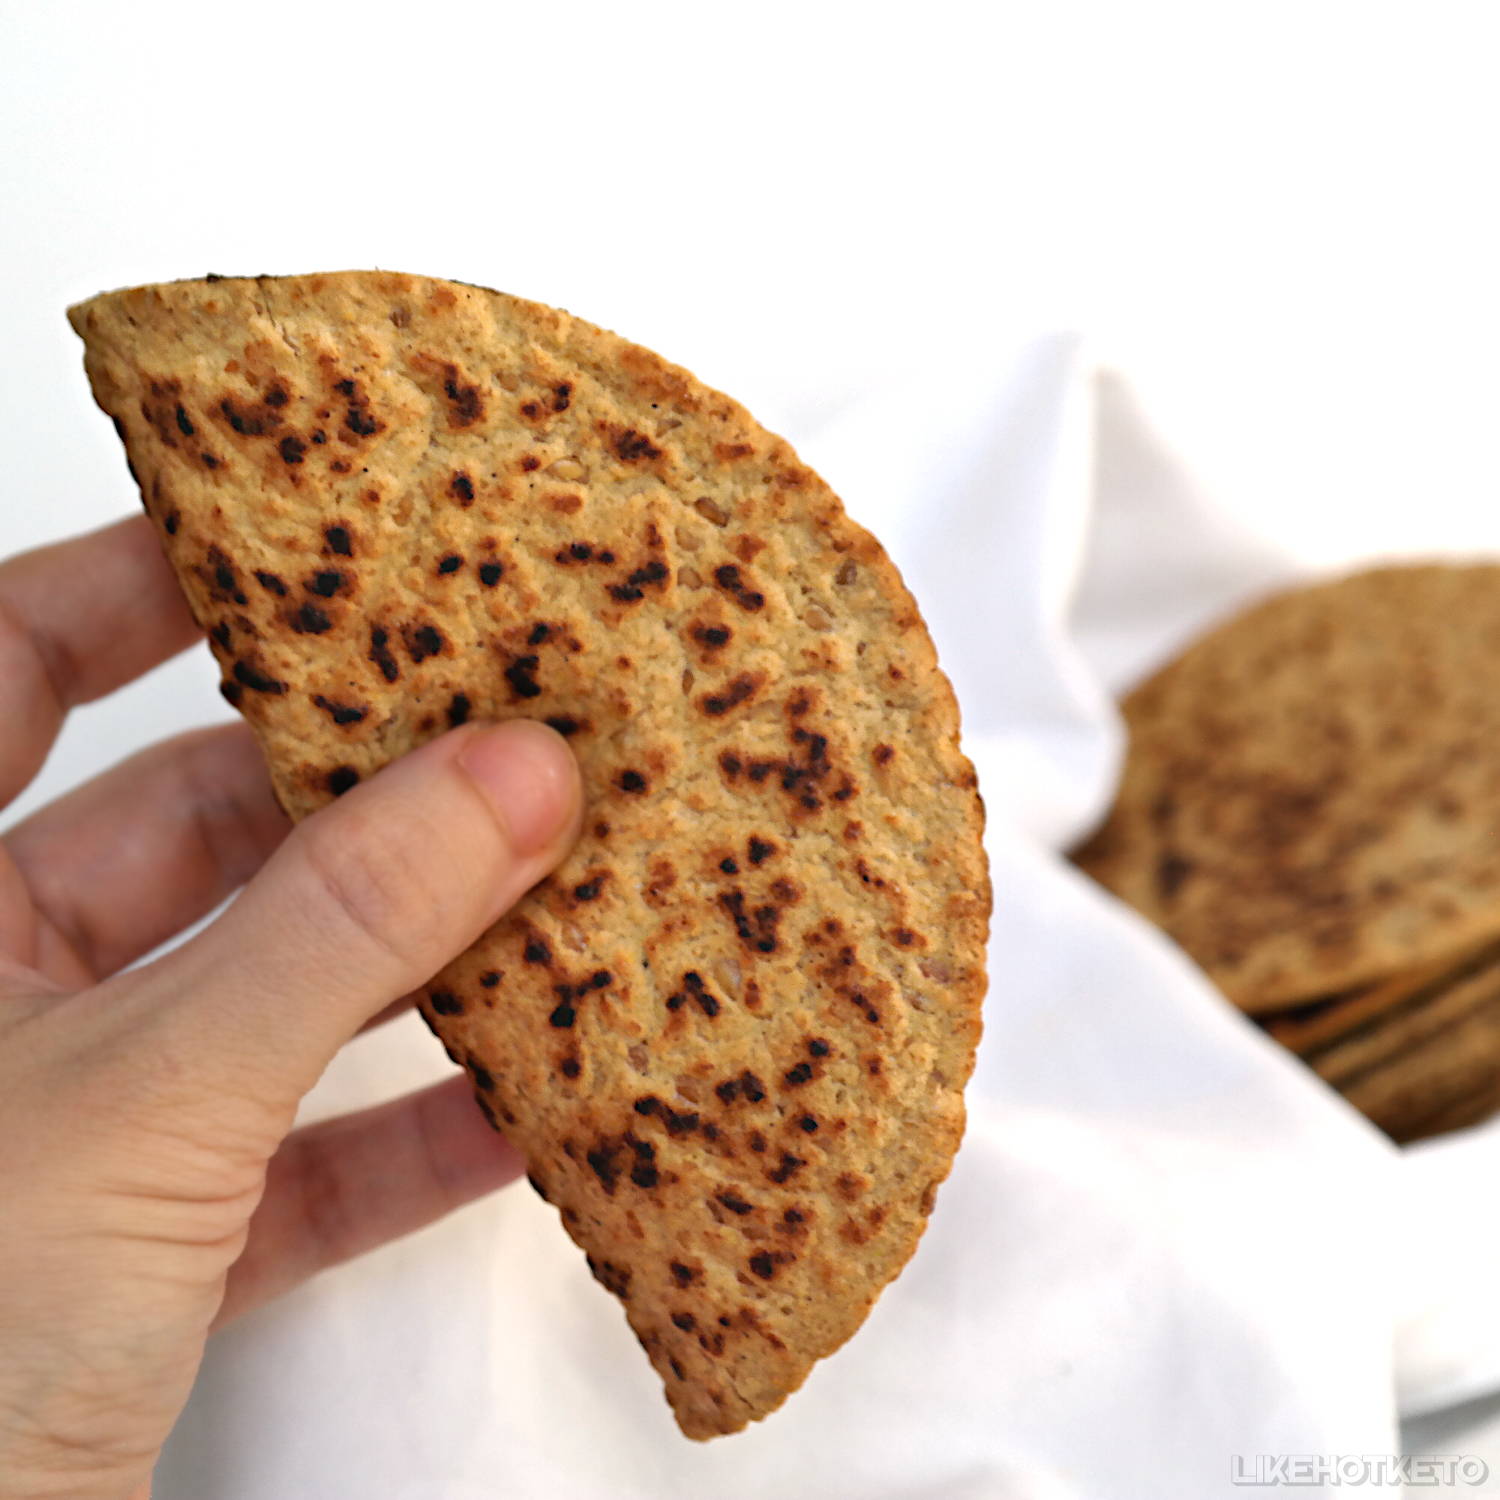 A keto flax tortilla folded to receive fillings.